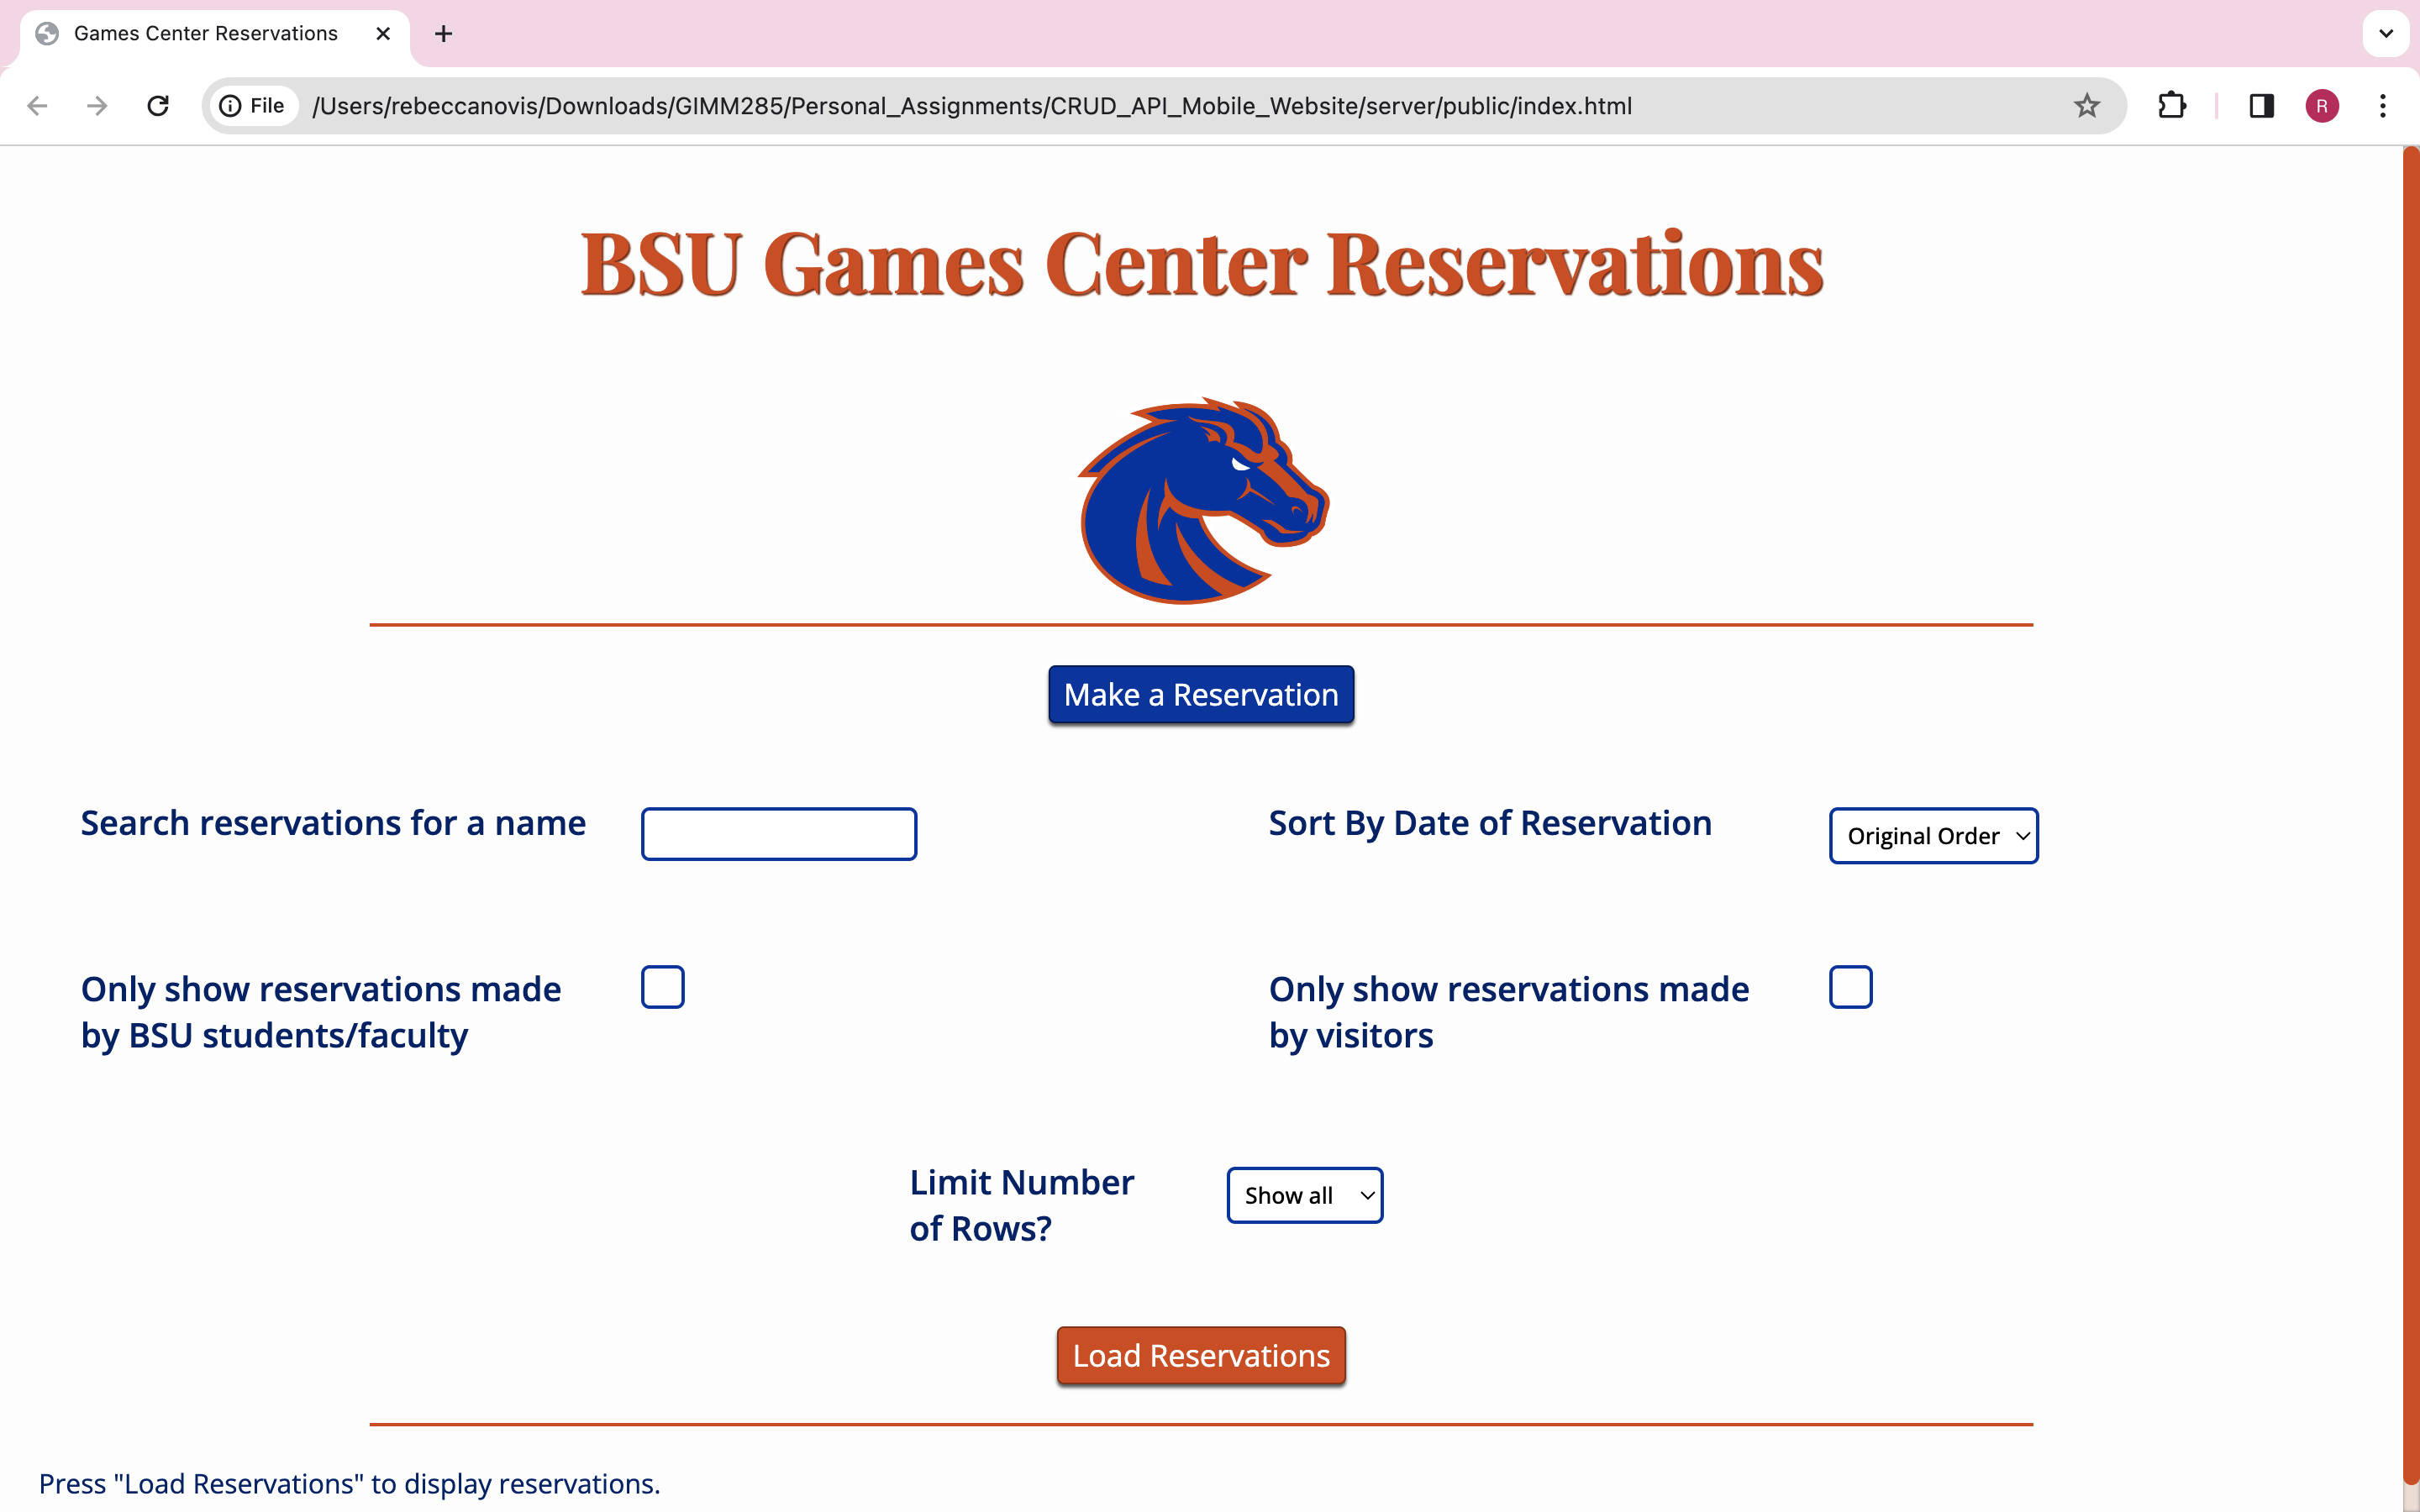 A screenshot from the Games Center Reservation website prototype